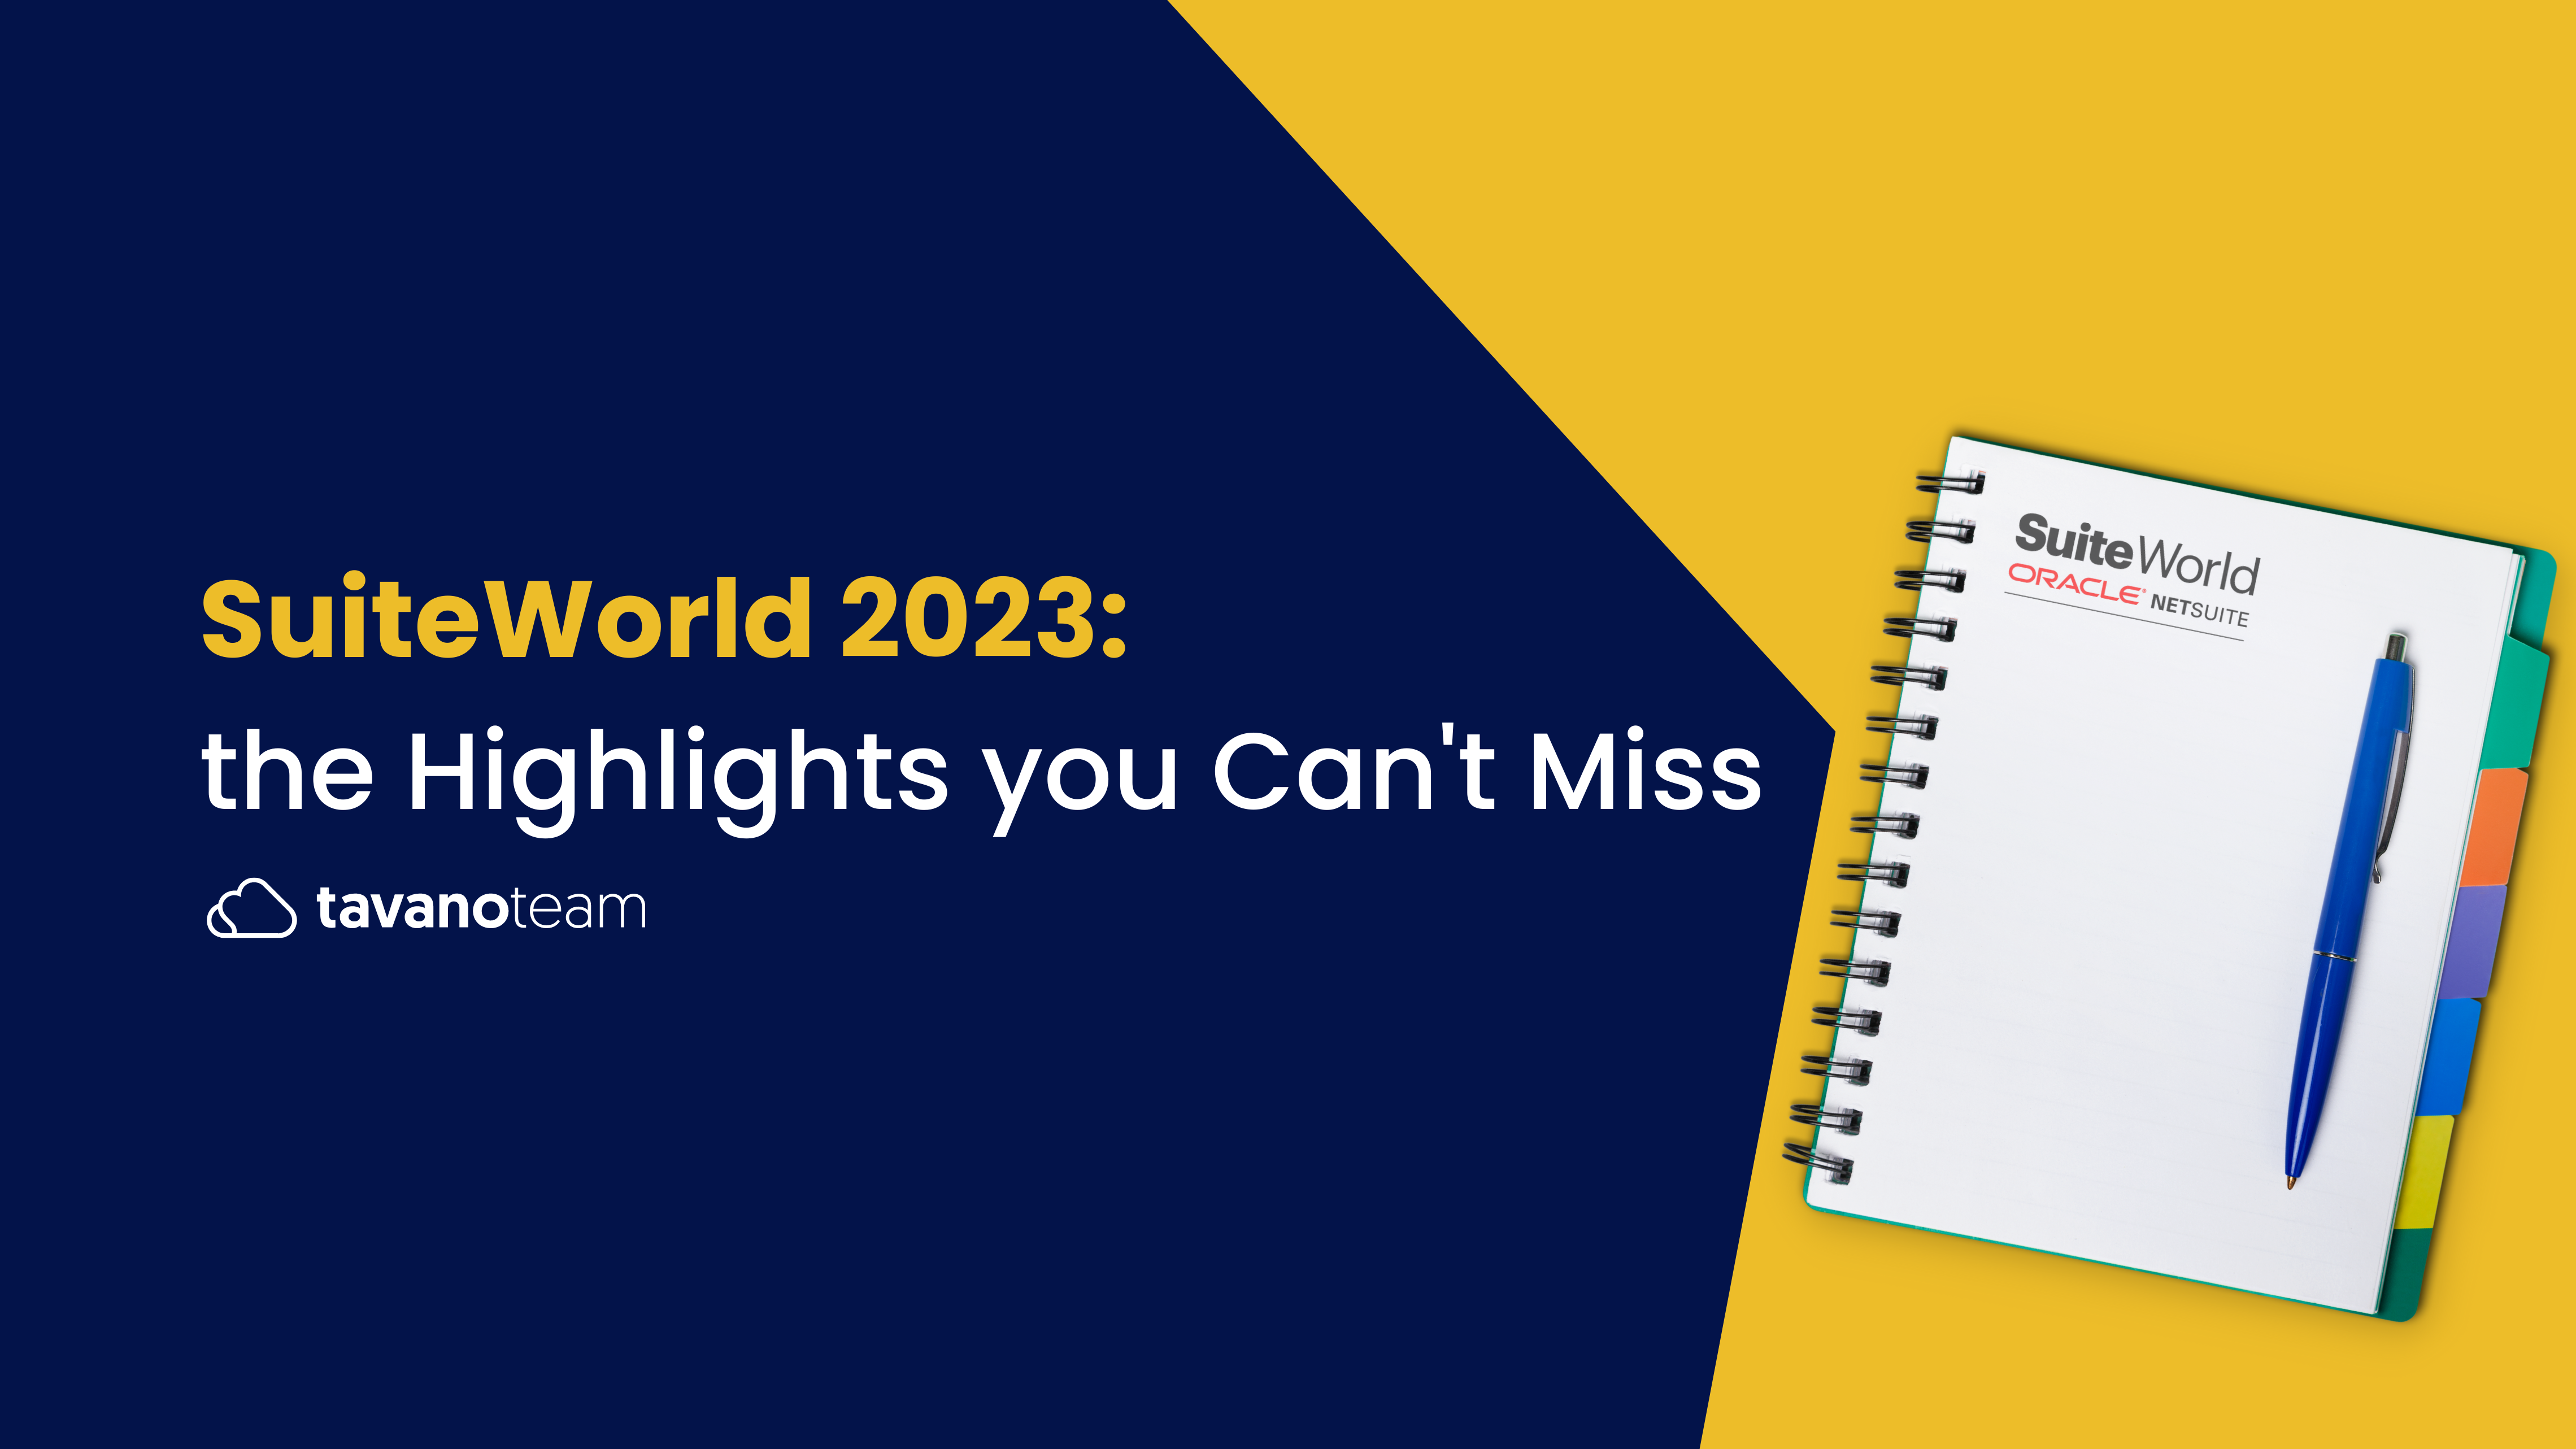 SuiteWorld-2023-the-Highlights-you-Cant-Miss